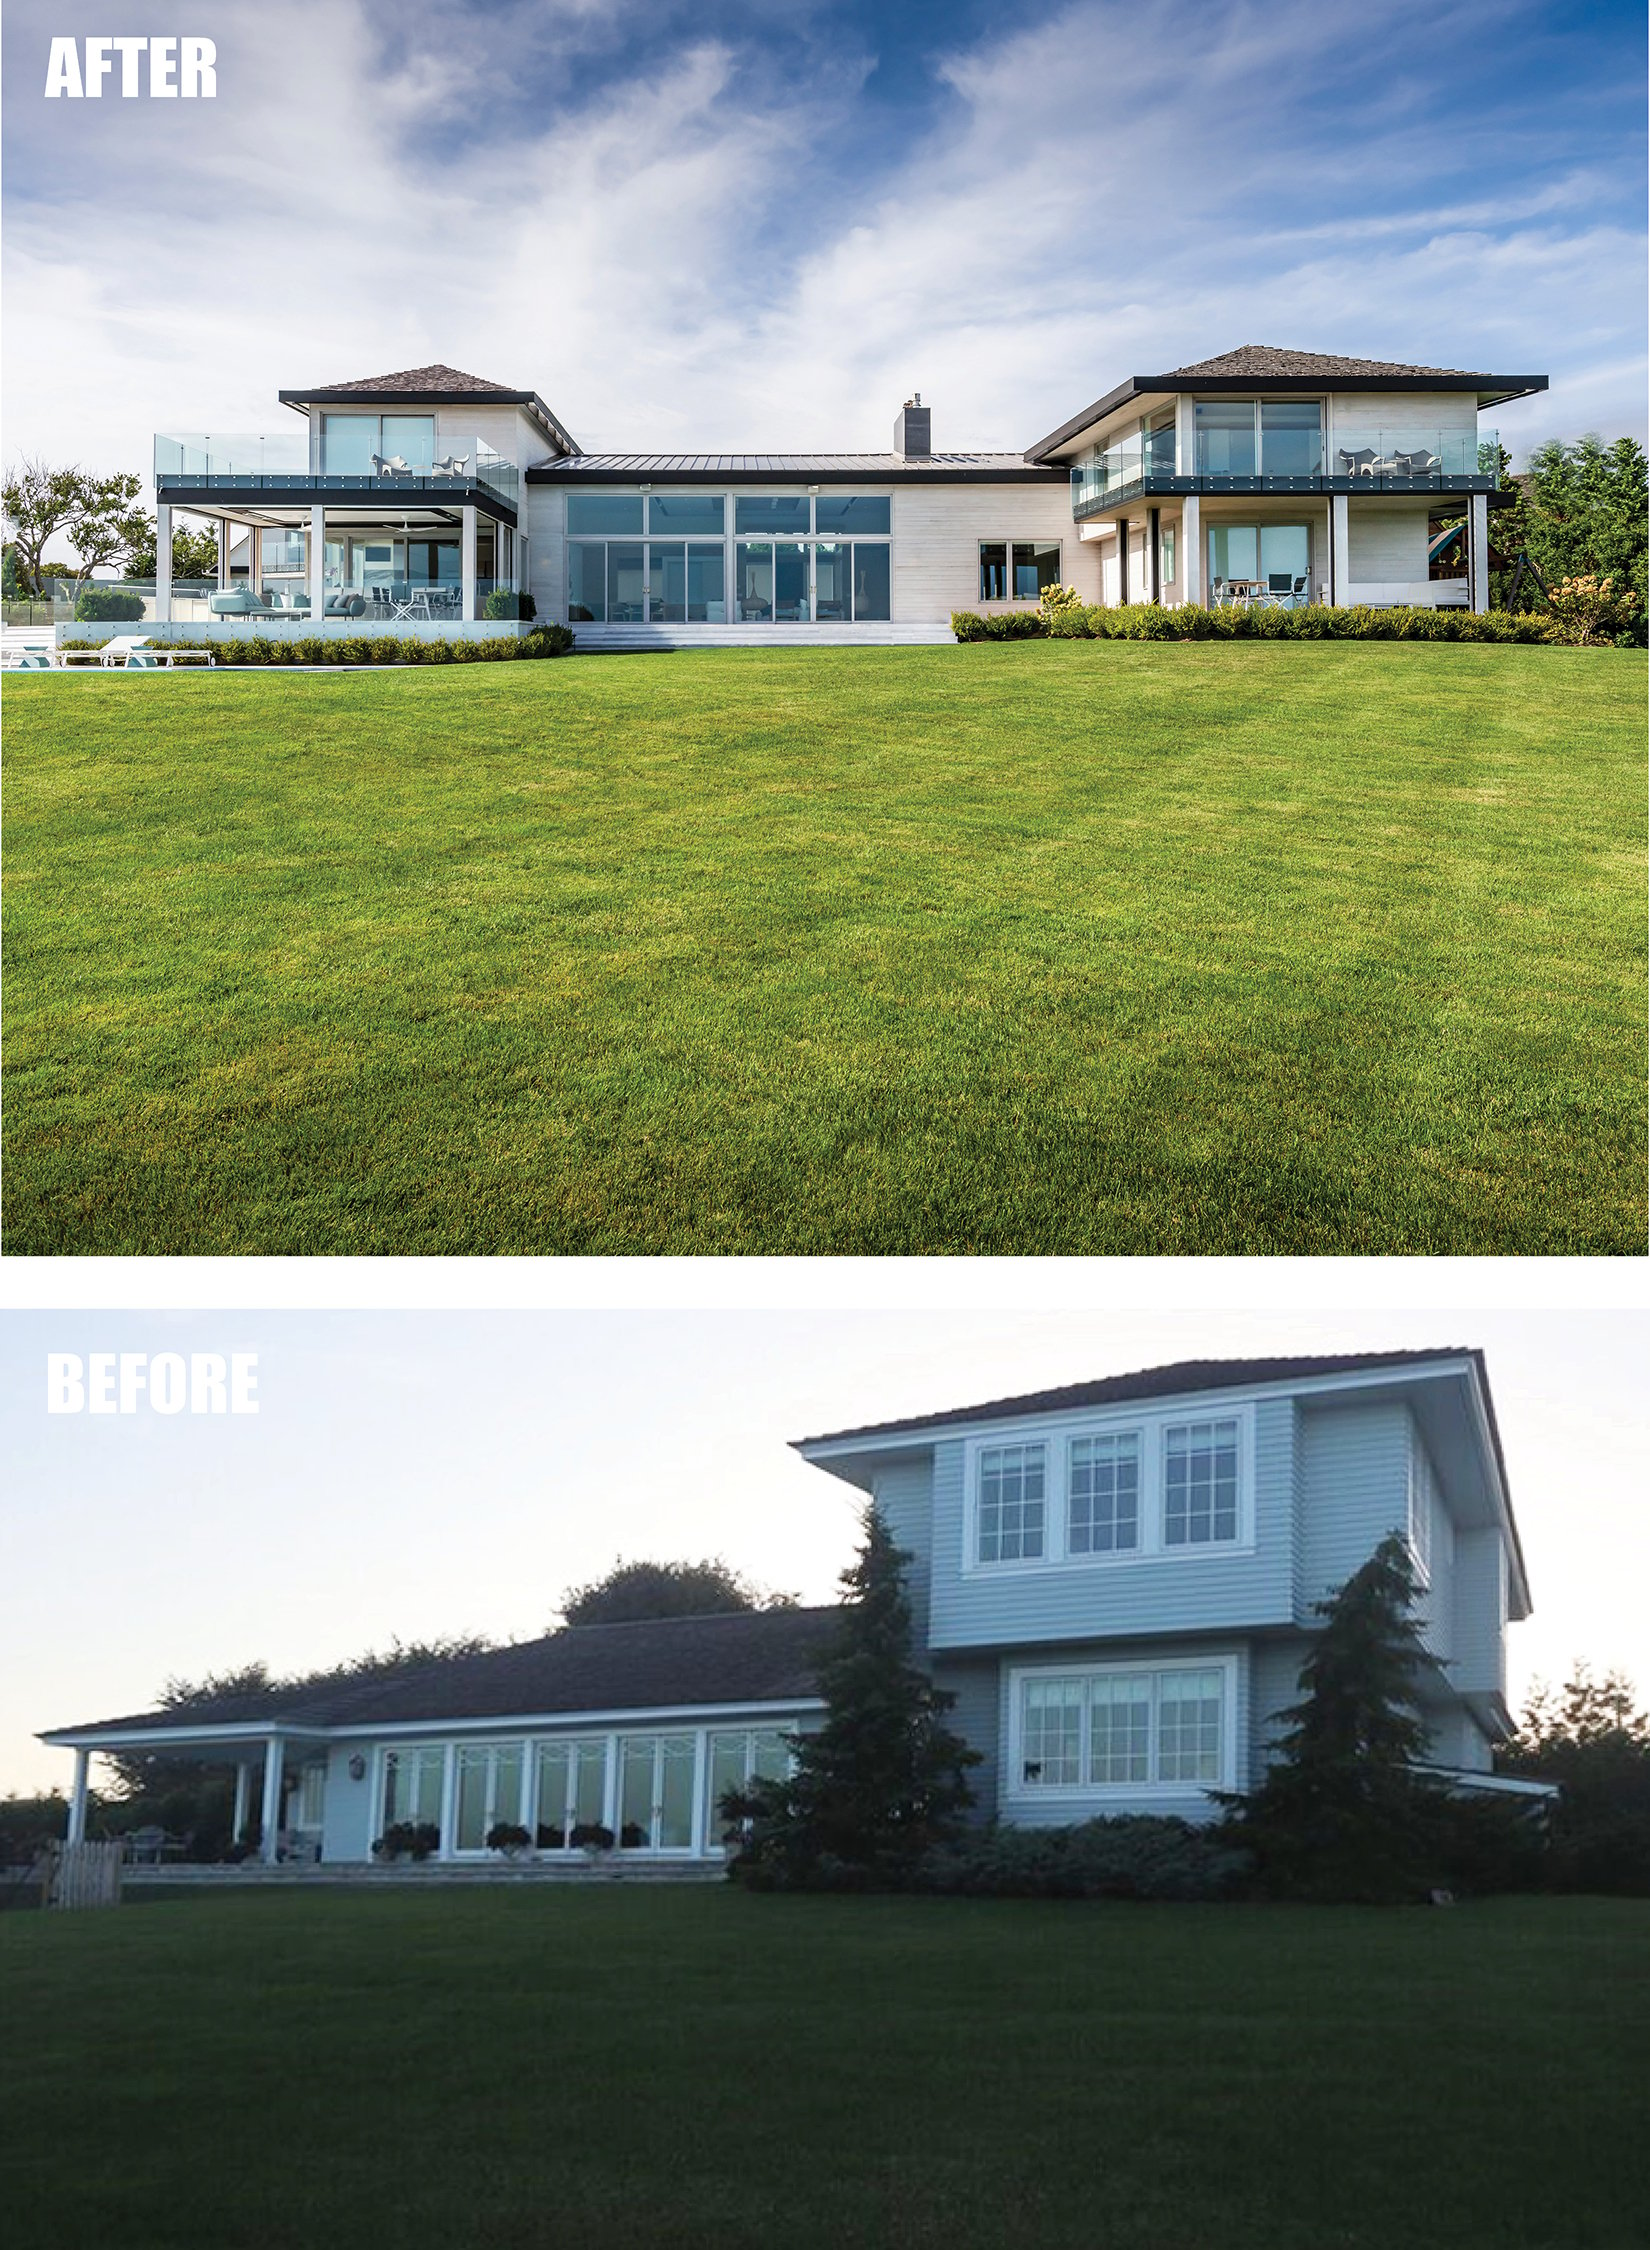 Quiogue Residence Before and After #2